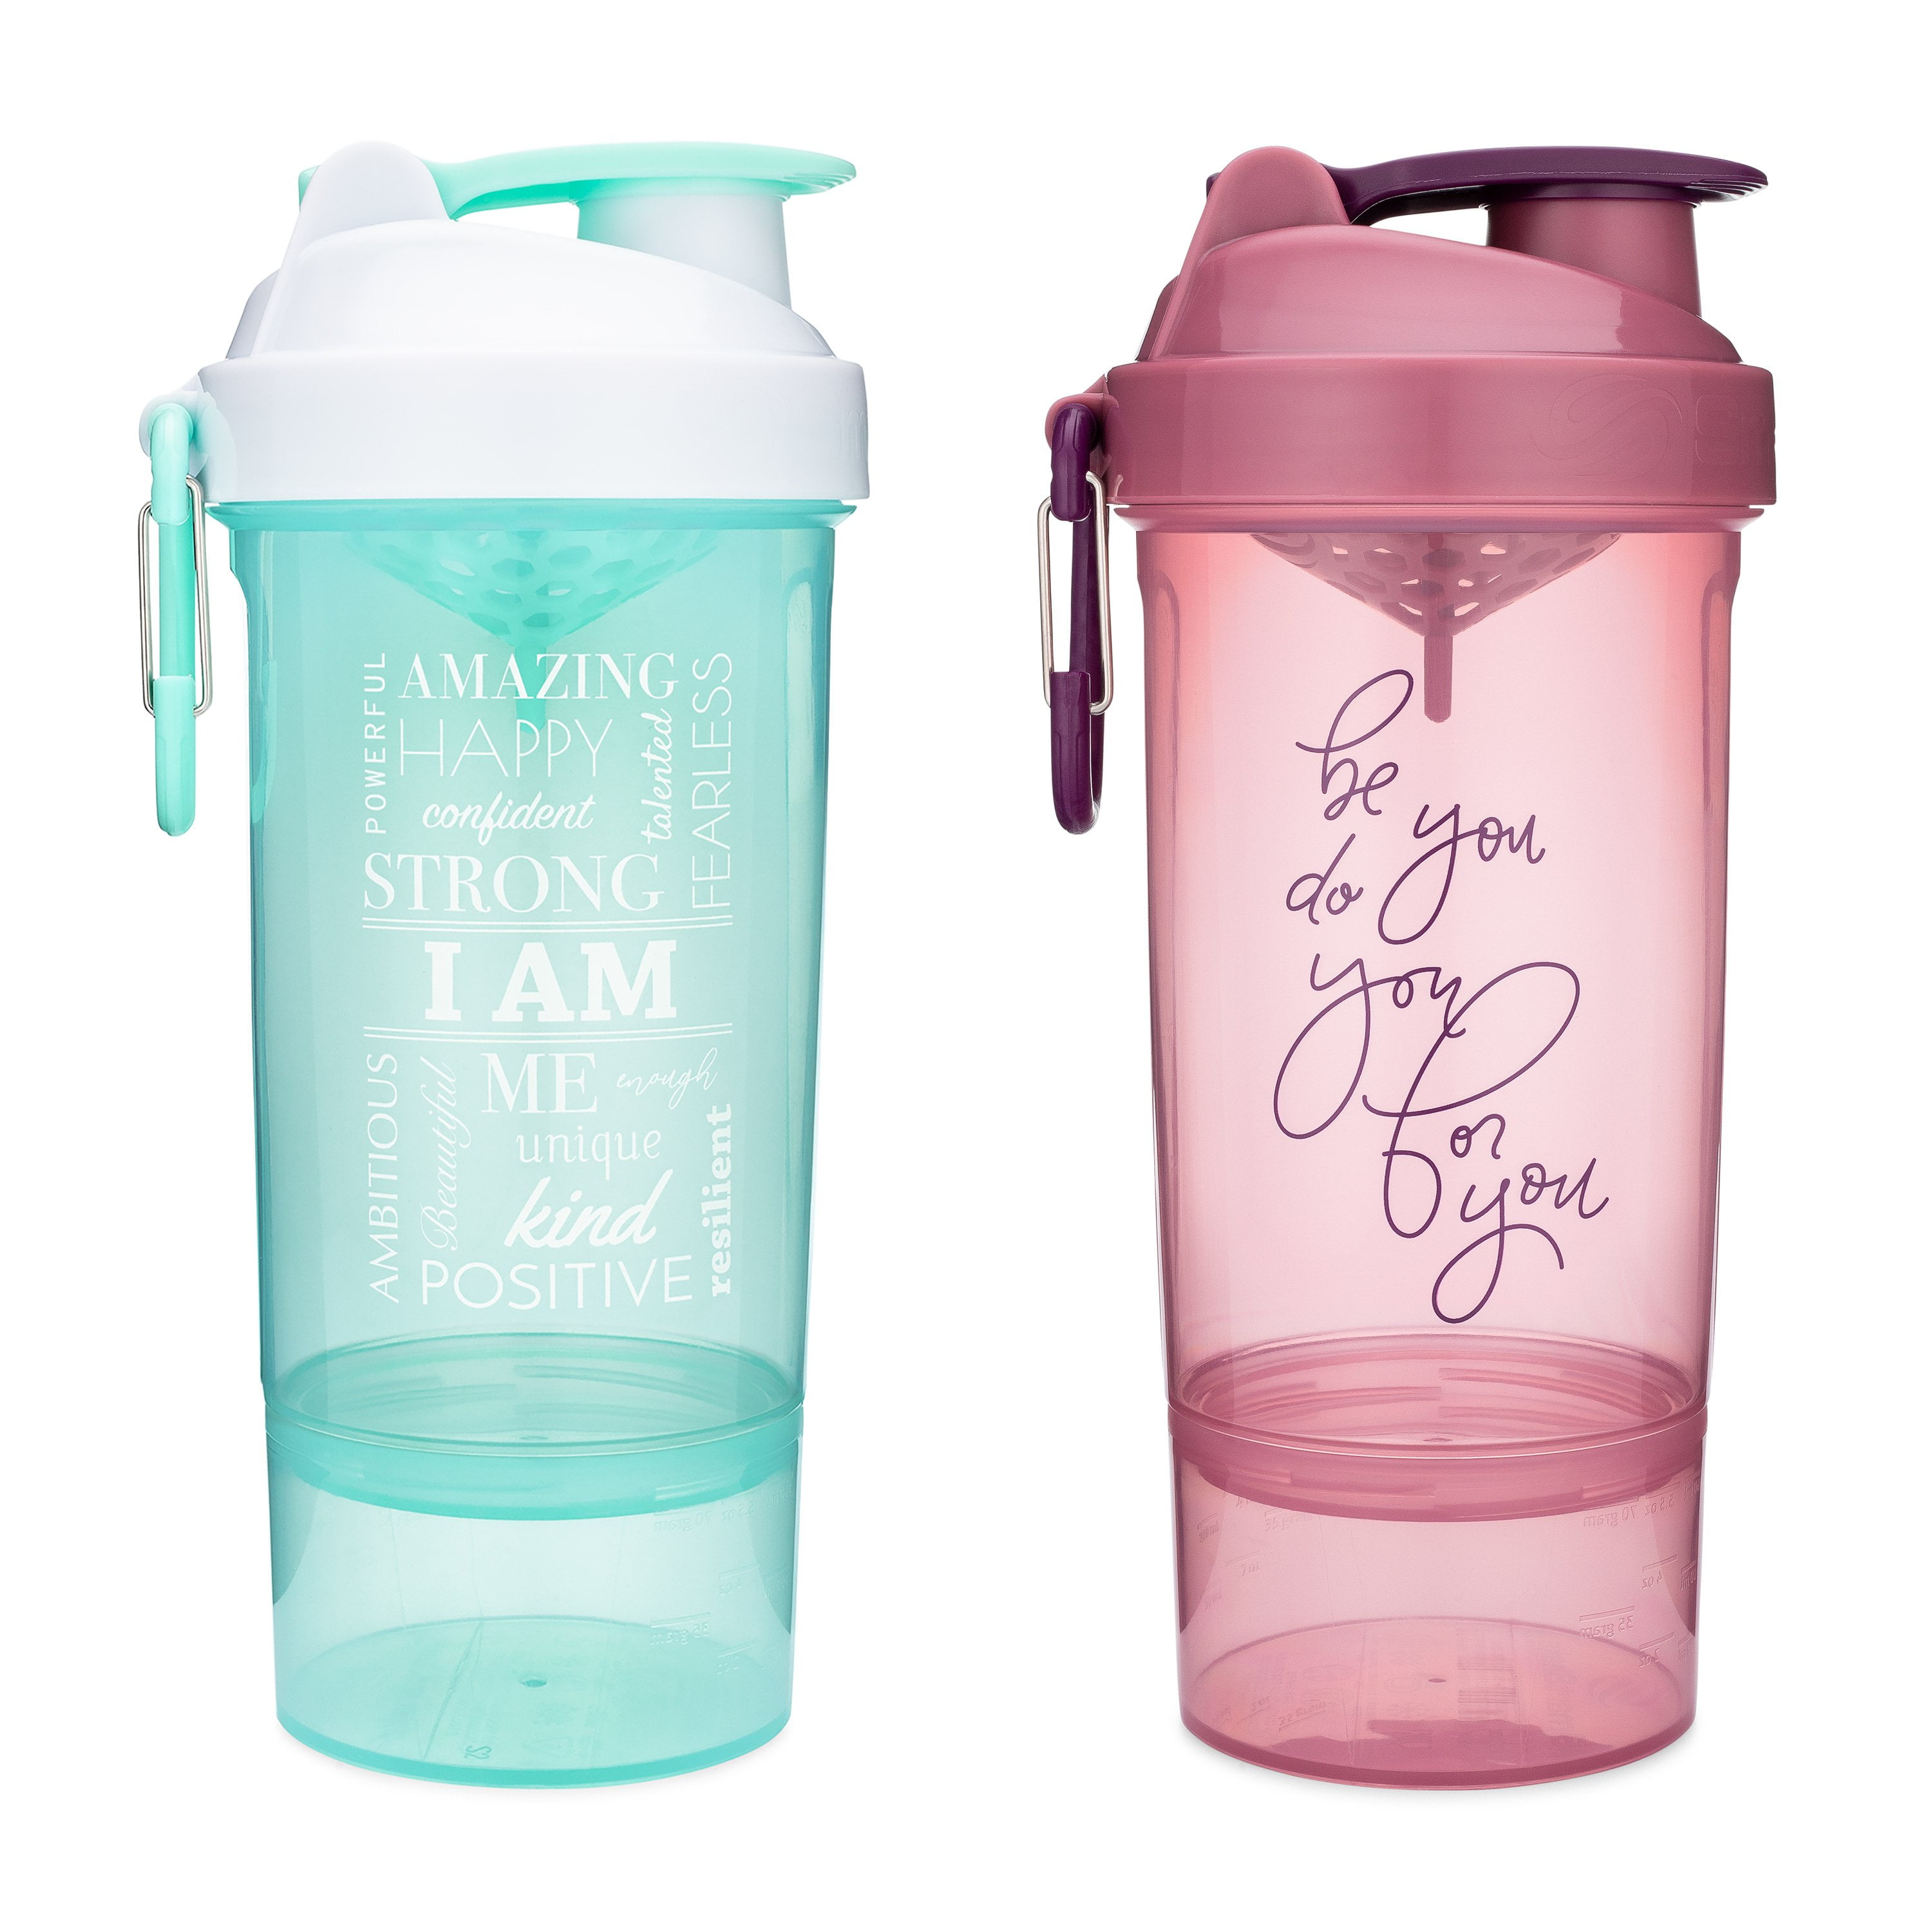  GOMOYO Shaker Bottle with Motivational Quotes, 27 Ounce Protein  Shaker Cup with Mixer Net, Attachable Container Storage for Protein or  Supplements, Perfect Fitness Gift